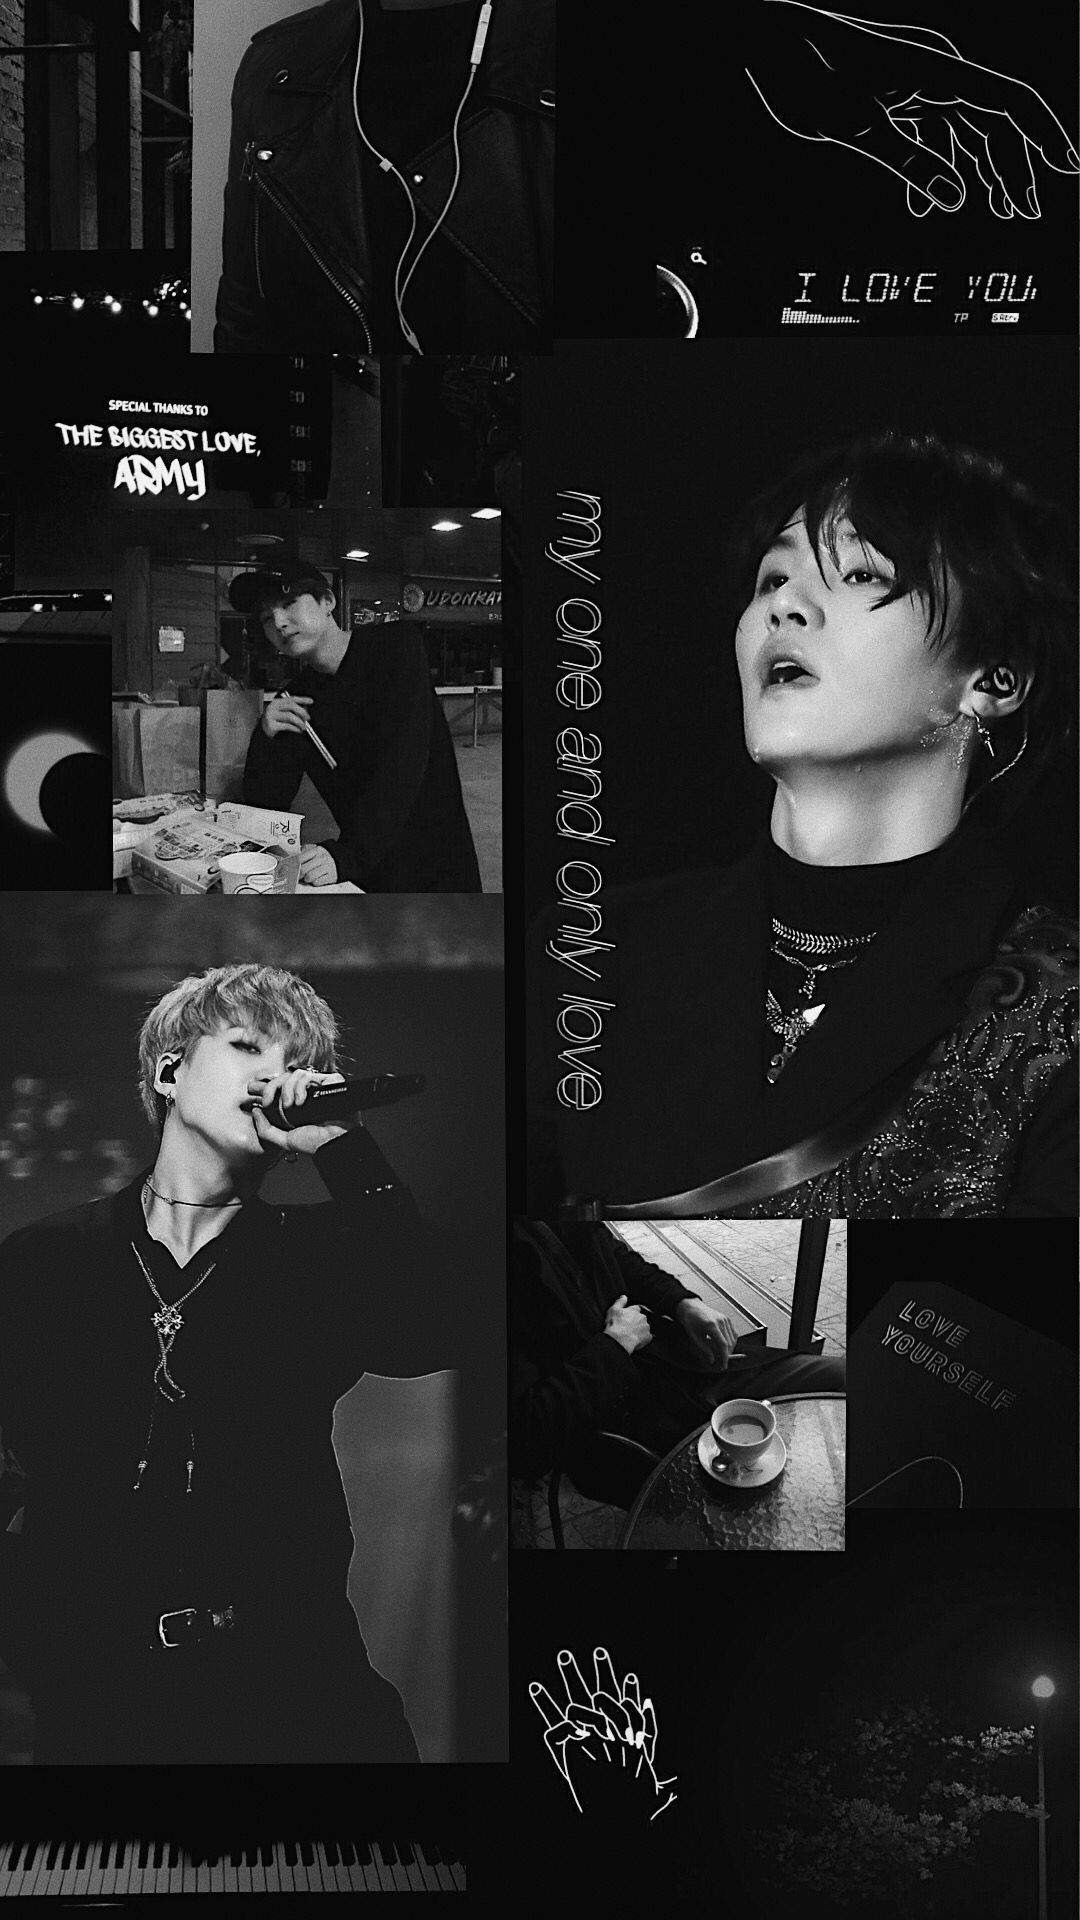 Black and white bts aesthetic wallpaper for mobile devices! - Suga